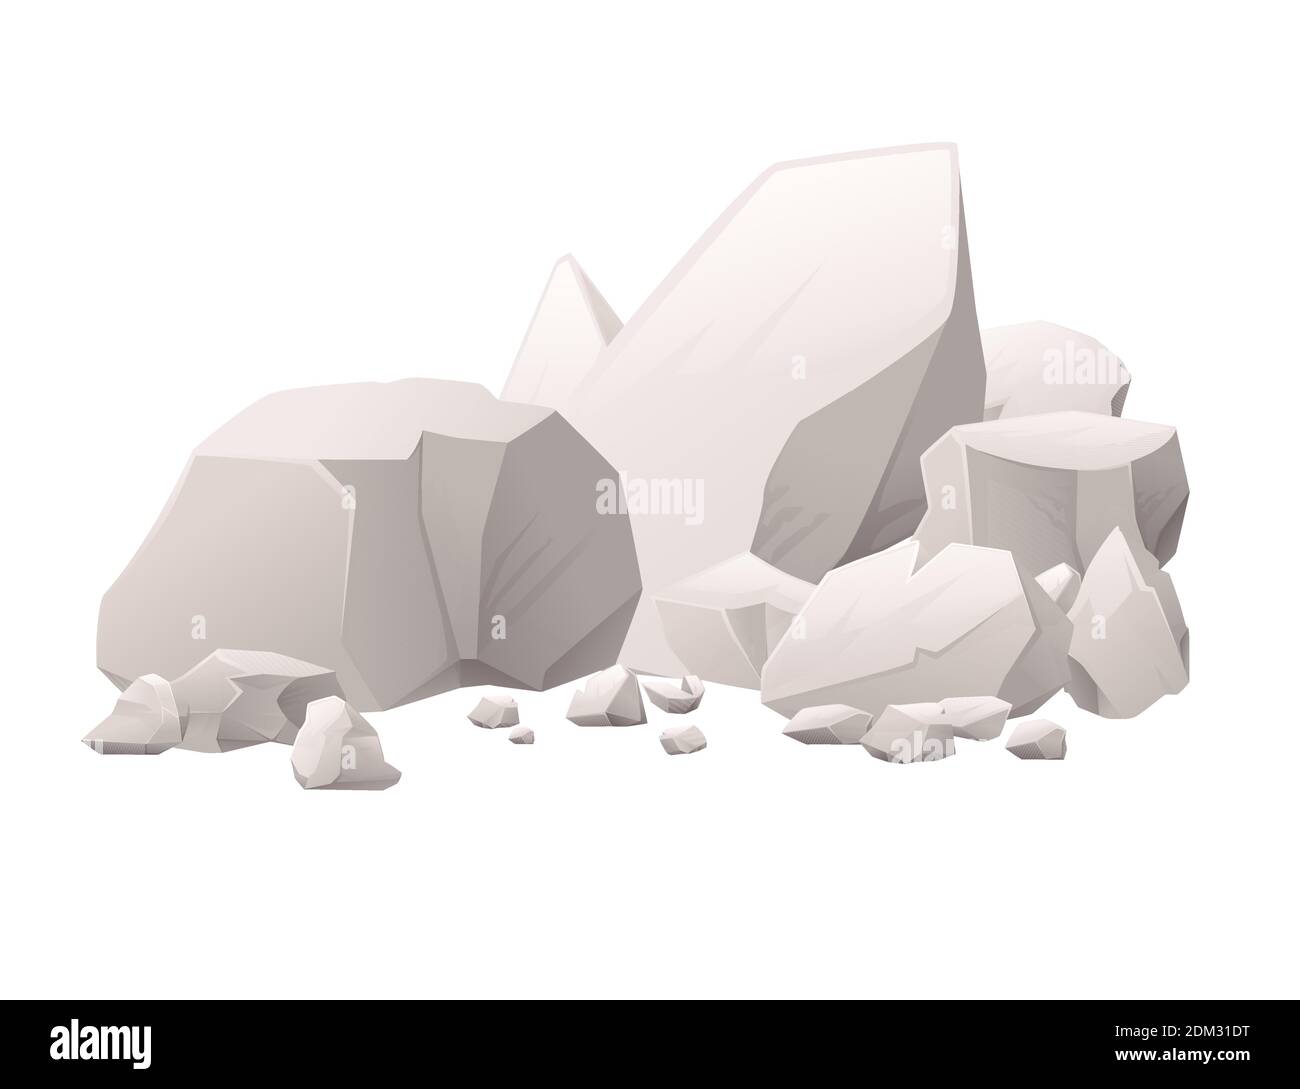 Group of gray stones and rocks different sizes and shapes flat vector illustration isolated on white background cartoon style design item for games Stock Vector